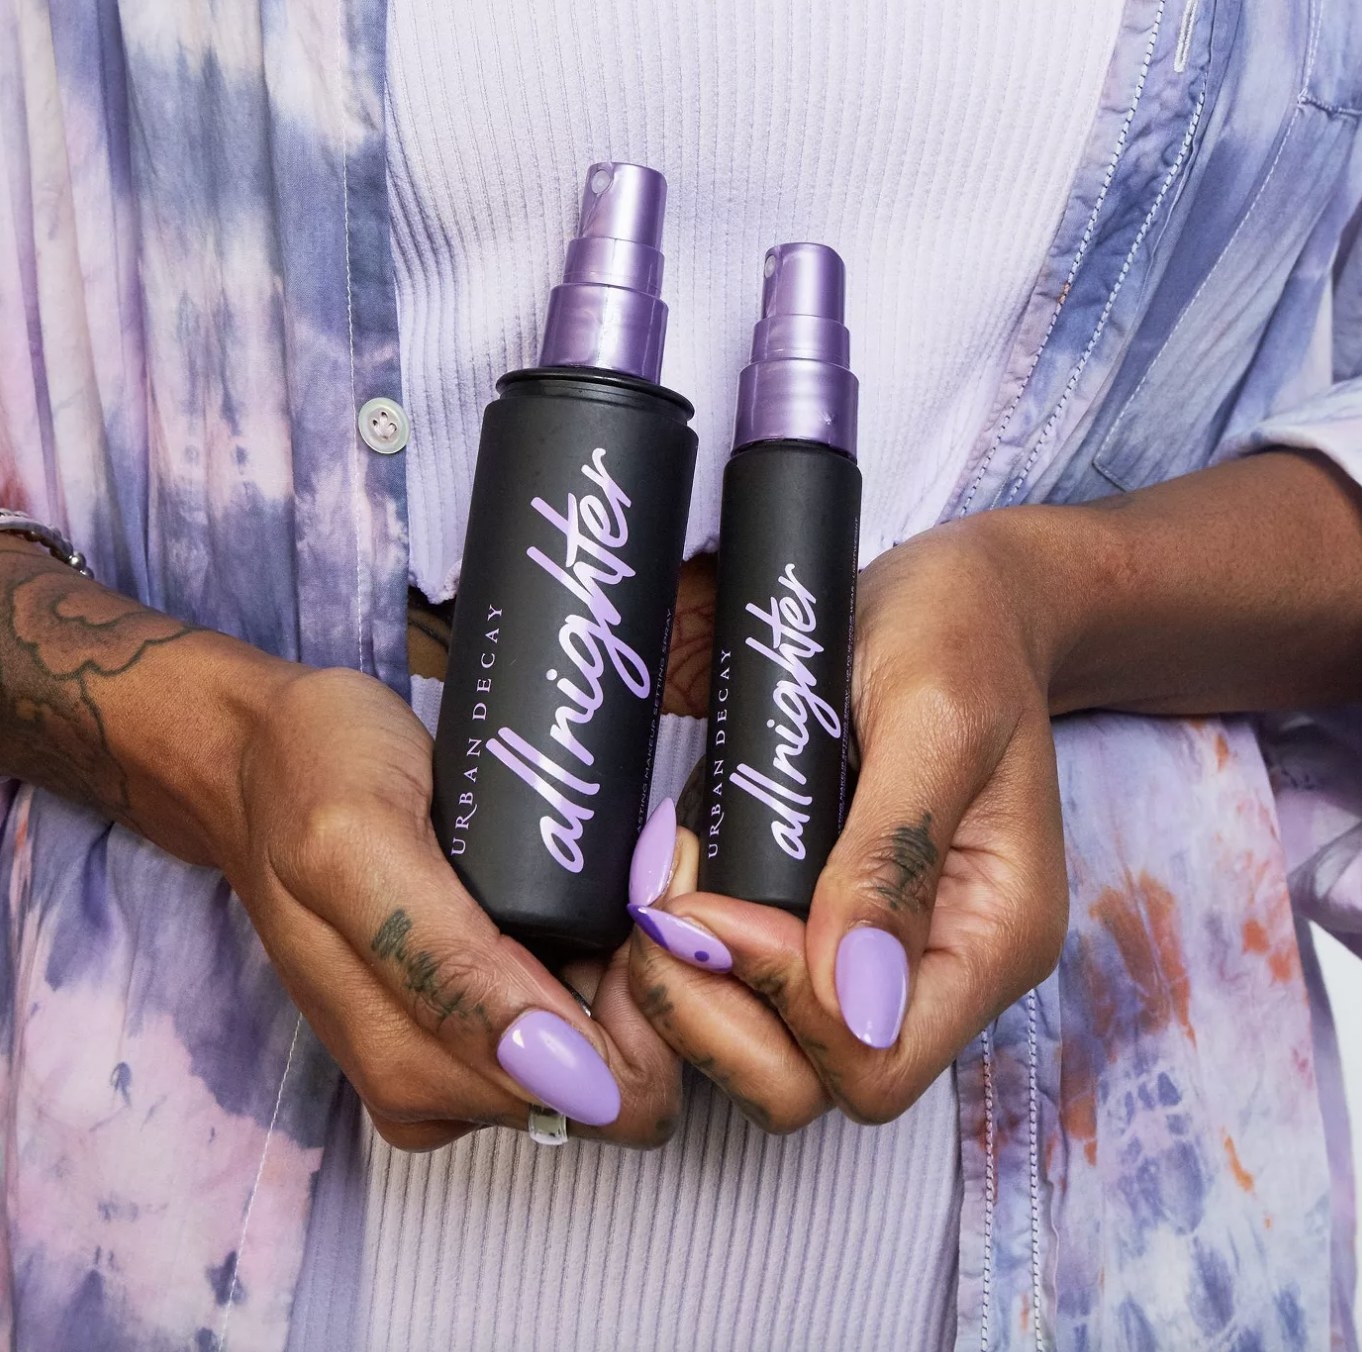 A person with a purple manicure holding small and large bottles of makeup setting spray